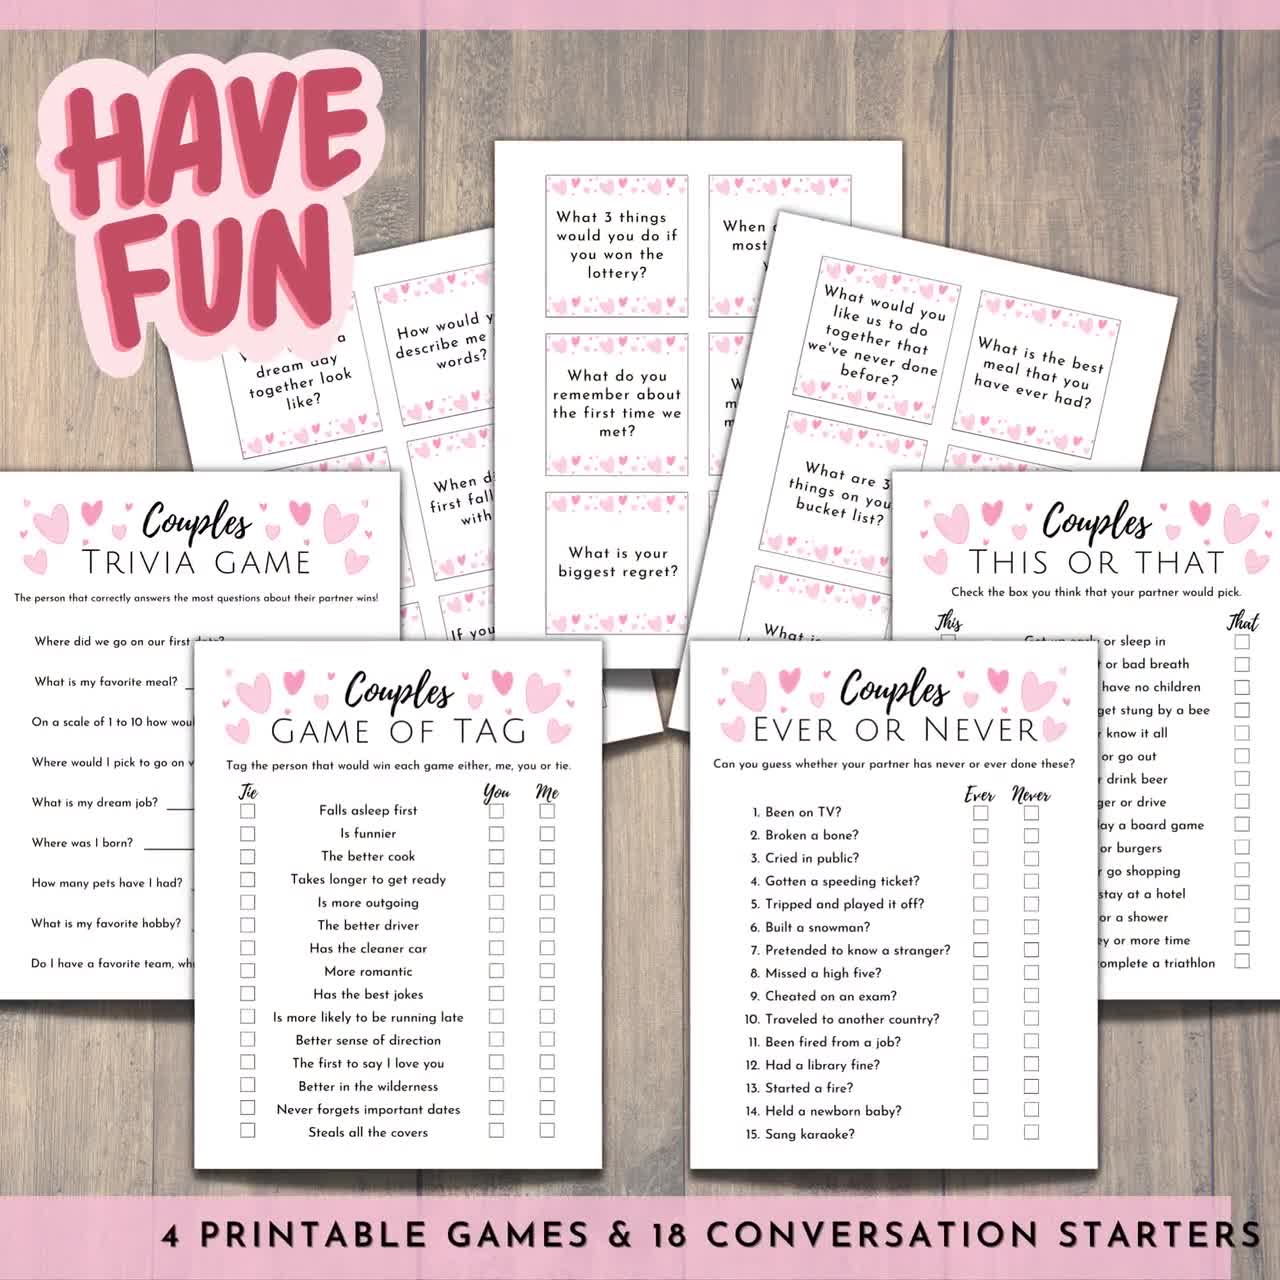 Couple Games Printable Date Night Games Anniversary Games for Couples Date  Night Fun Couple Games Night Adult Valentines Day Party Games SH1 -   Sweden